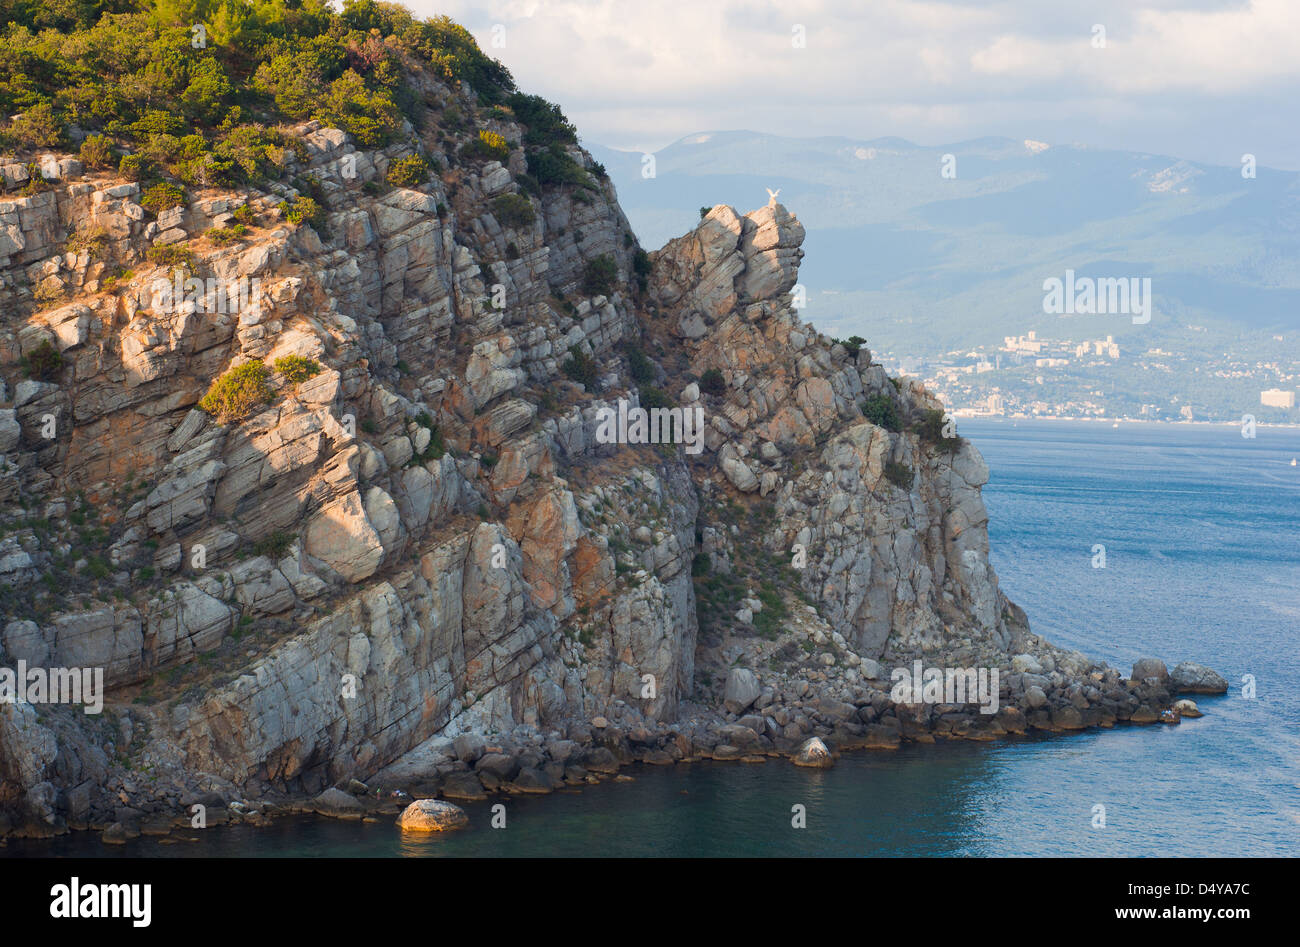 The rock with a stone eagle at top near 'Swallow's nest', the Crimea, Ukraine Stock Photo